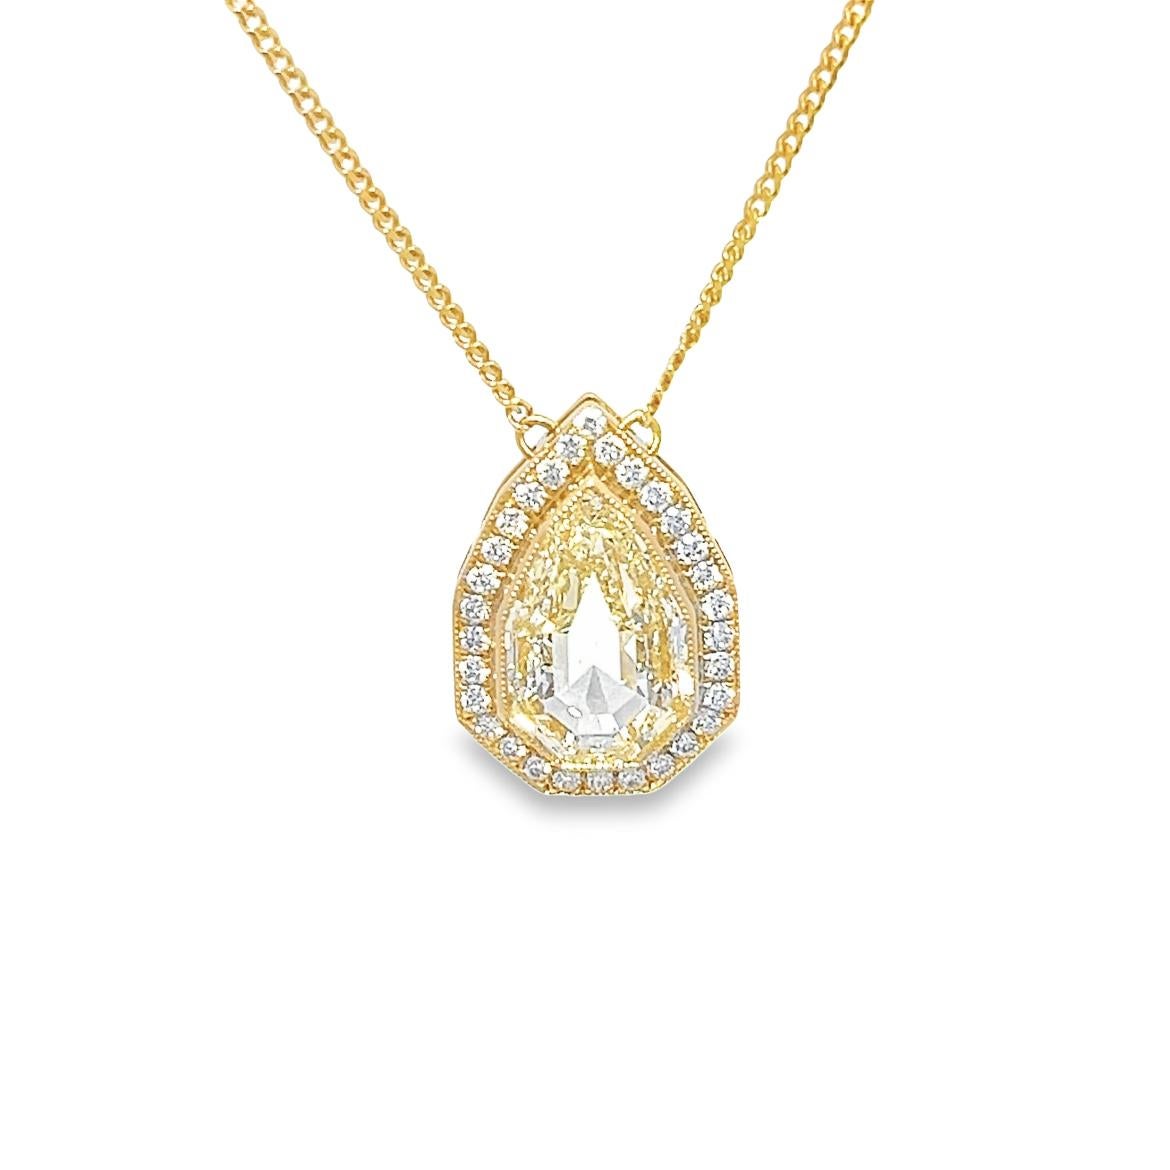 one-of-a-kind natural 3.02CT Modified PeIntroducing a one-of-a-kind 3.02CT Modified Pear Step Cut Yellow Art Deco Pendant that is sure to make a statement. This stunning piece features a GIA-certified #6227082258 M color diamond with crystal,